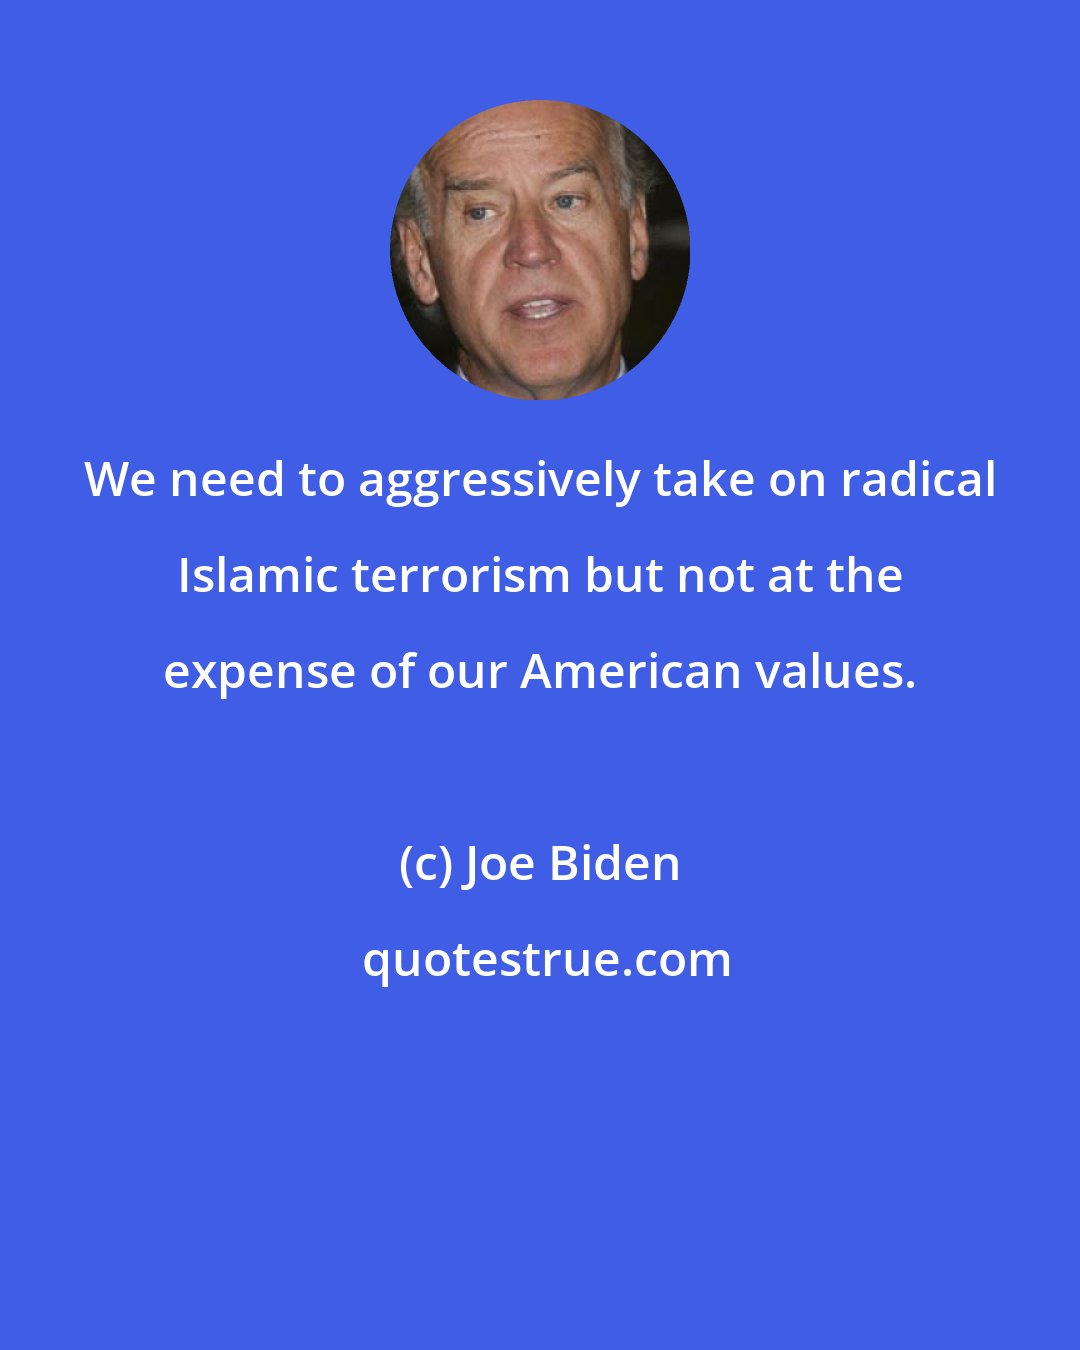 Joe Biden: We need to aggressively take on radical Islamic terrorism but not at the expense of our American values.